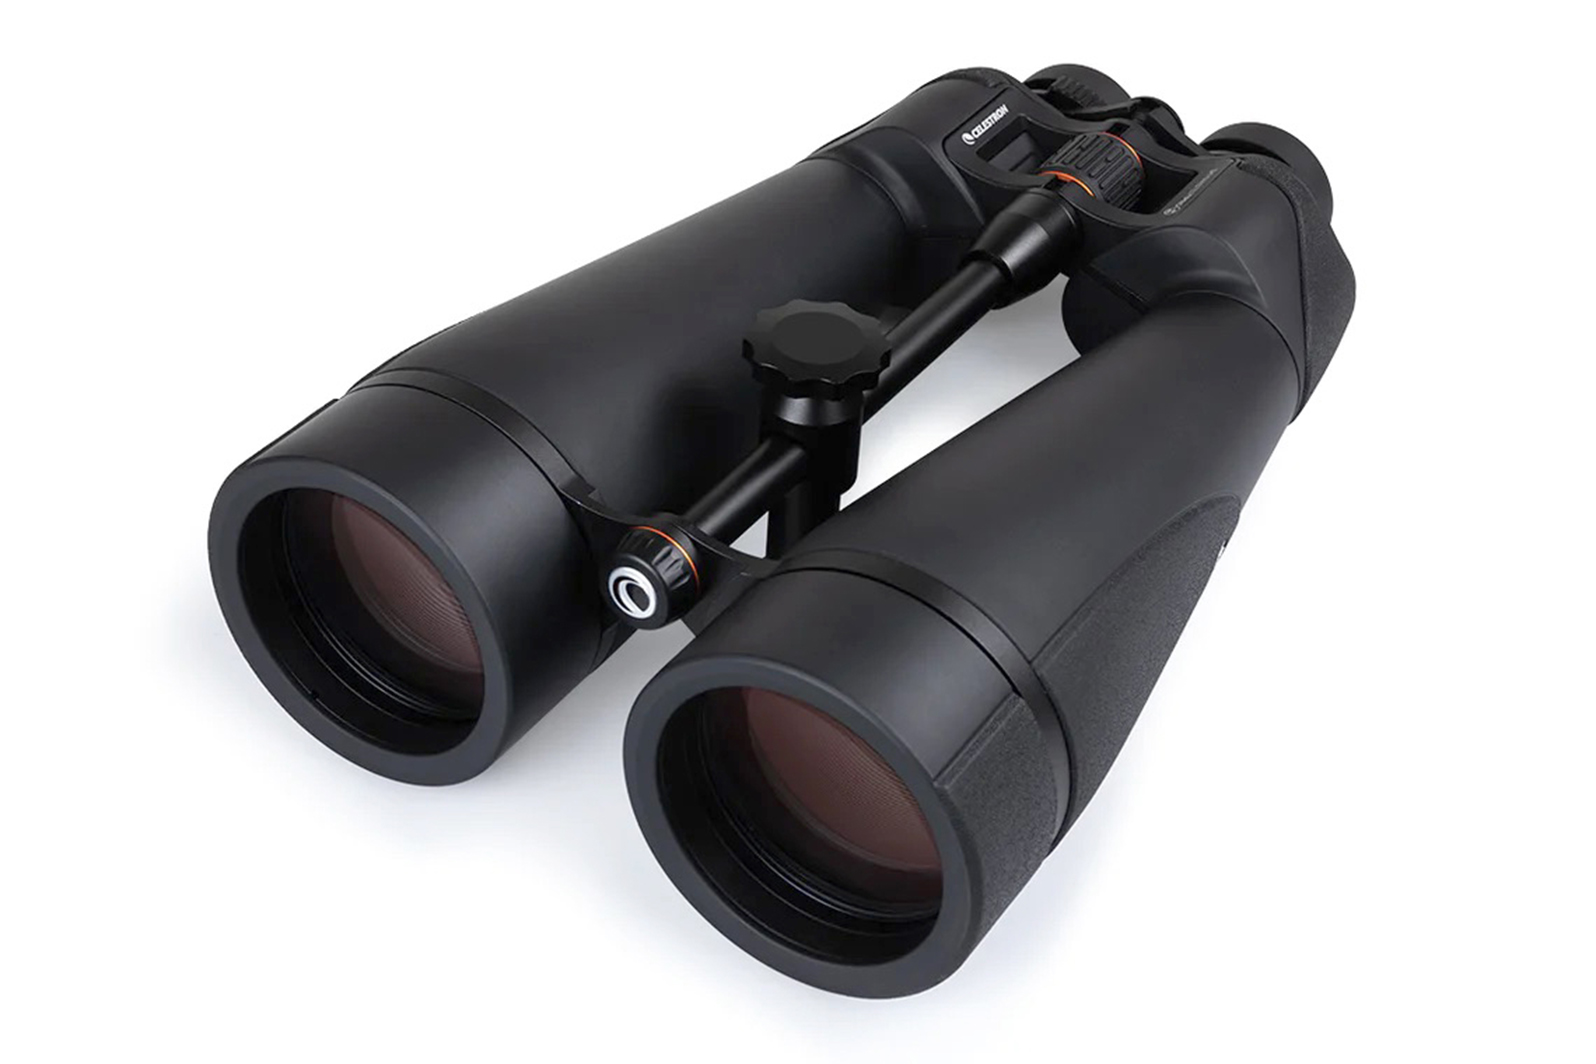 Celestron has upgraded the Pro models in its line of SkyMaster Porro binoculars with ED glass lenses and larger prisms. This review covers the 20x80mm model.